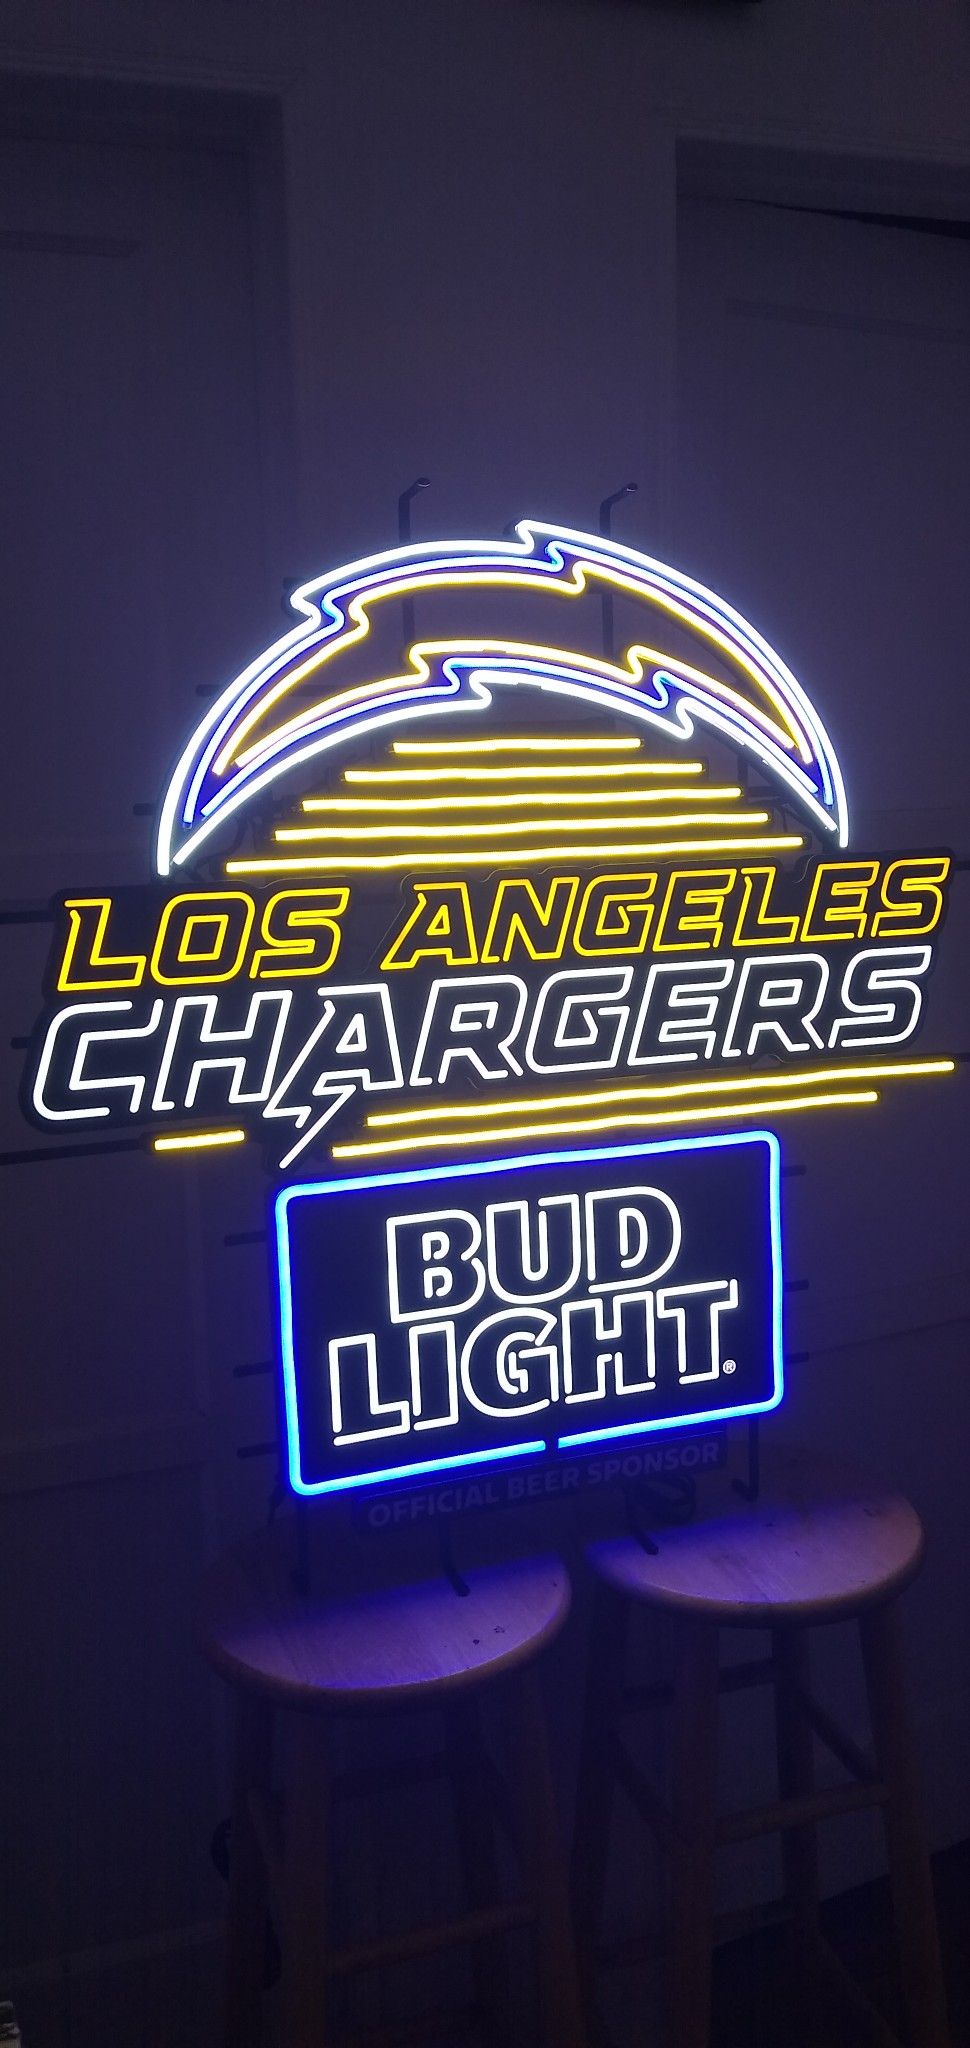 BUD LIGHT LA CHARGERS LED SIGN . ( ALSO PLENTY OF NEON SIGNS / LIGHTS AVAILABLE FOR SALE )DODGERS & ANGELS BOBBLEHEADS AVAILABLE.